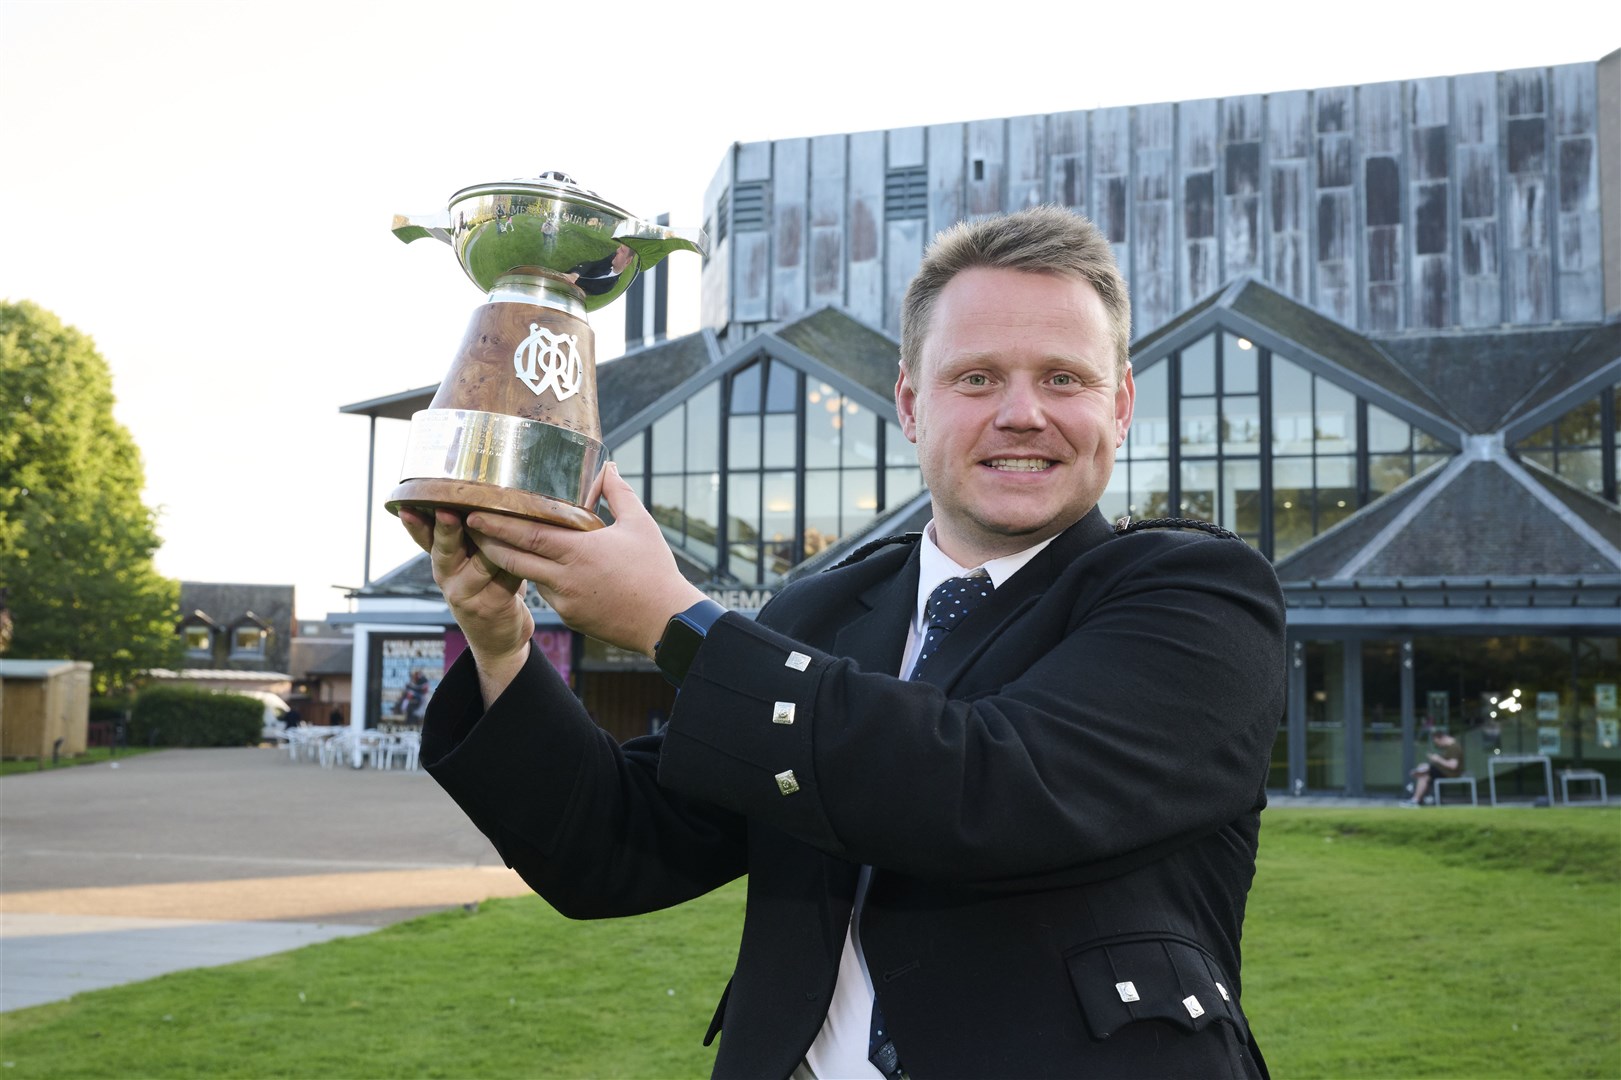 Callum Beaumont with the Northern Meeting Quaich for aggregate performance in former winners competitions in front of Eden Court.